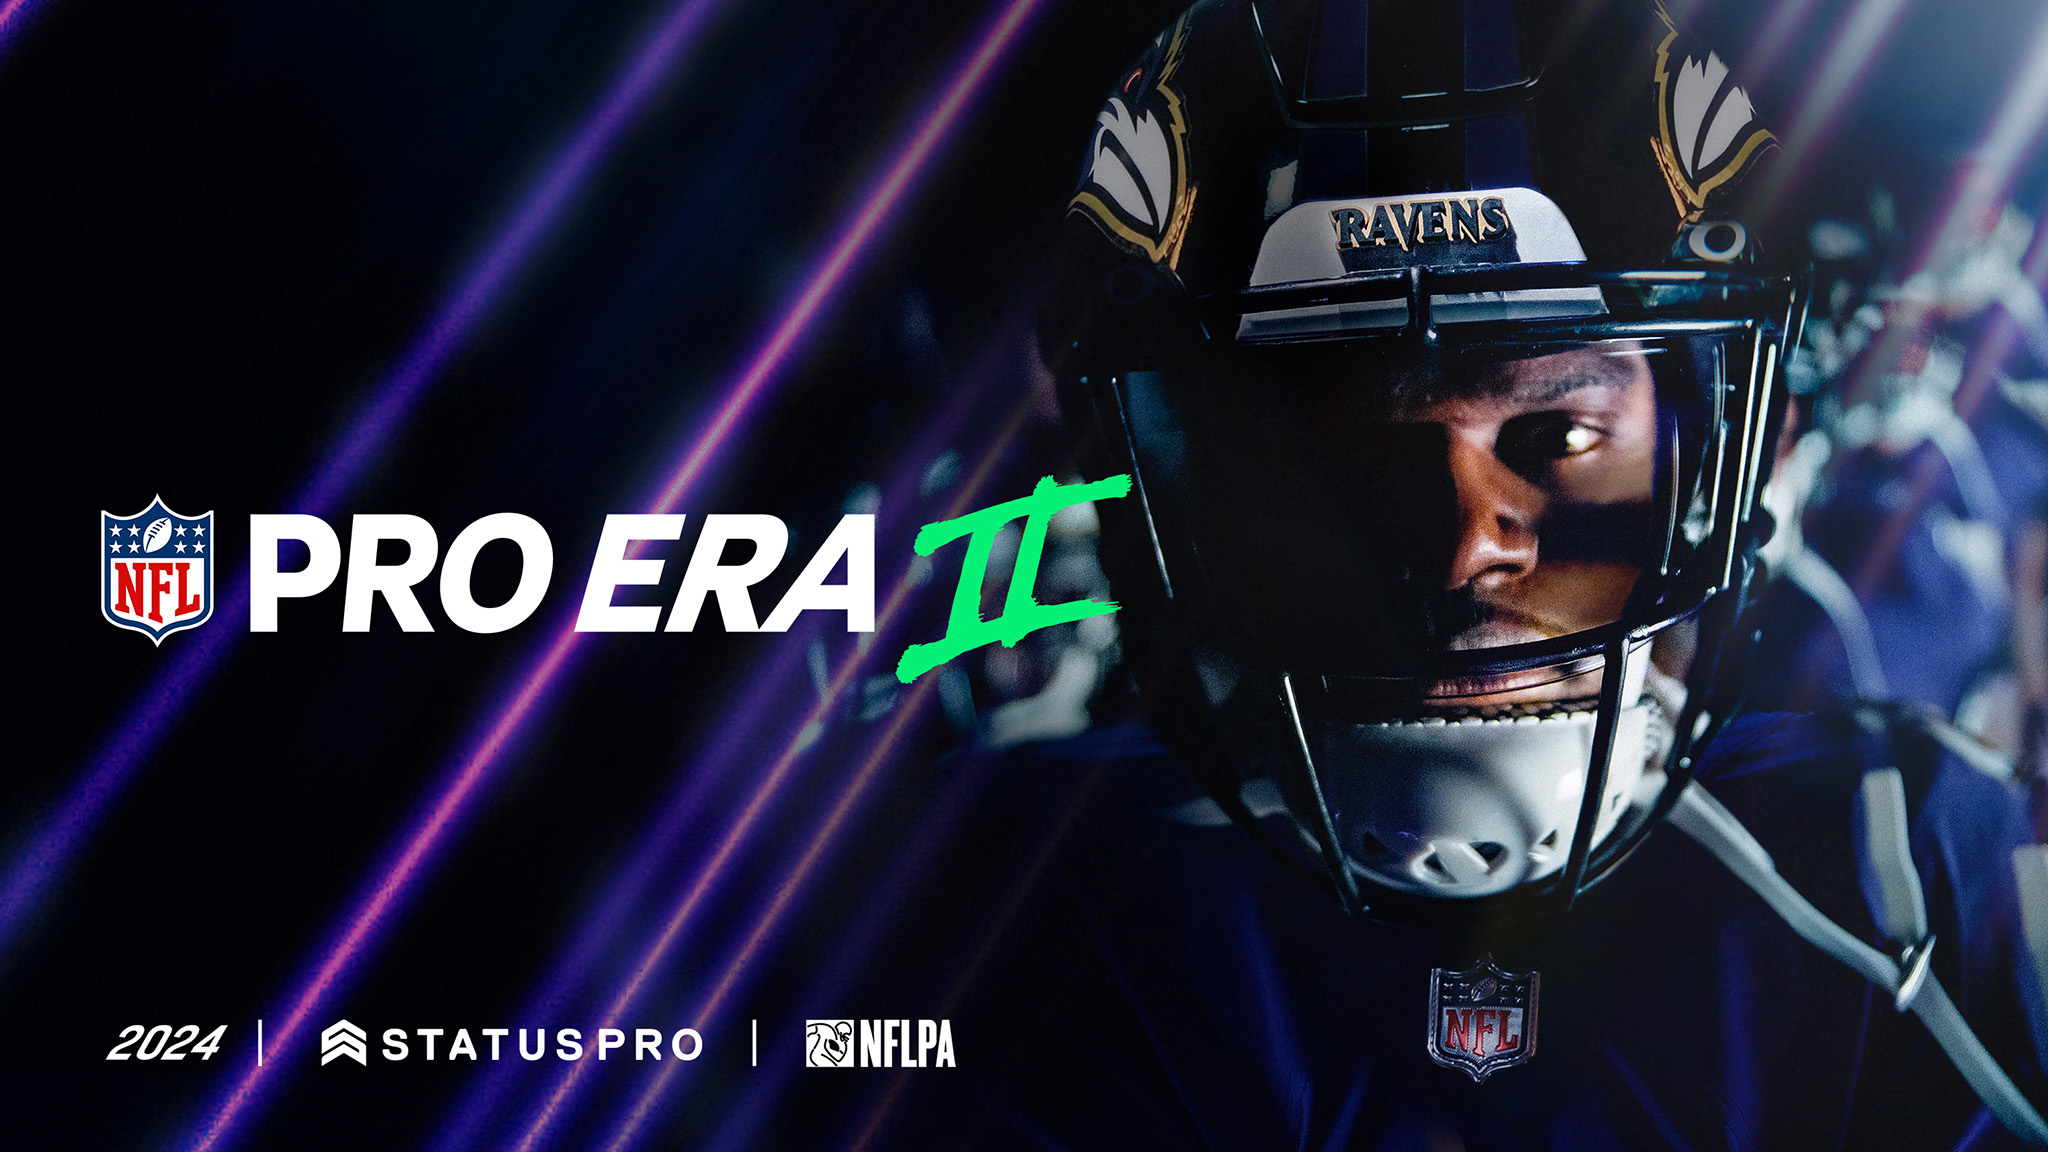 NFL PRO ERA II is taking VR football to the next level on Quest Android Central